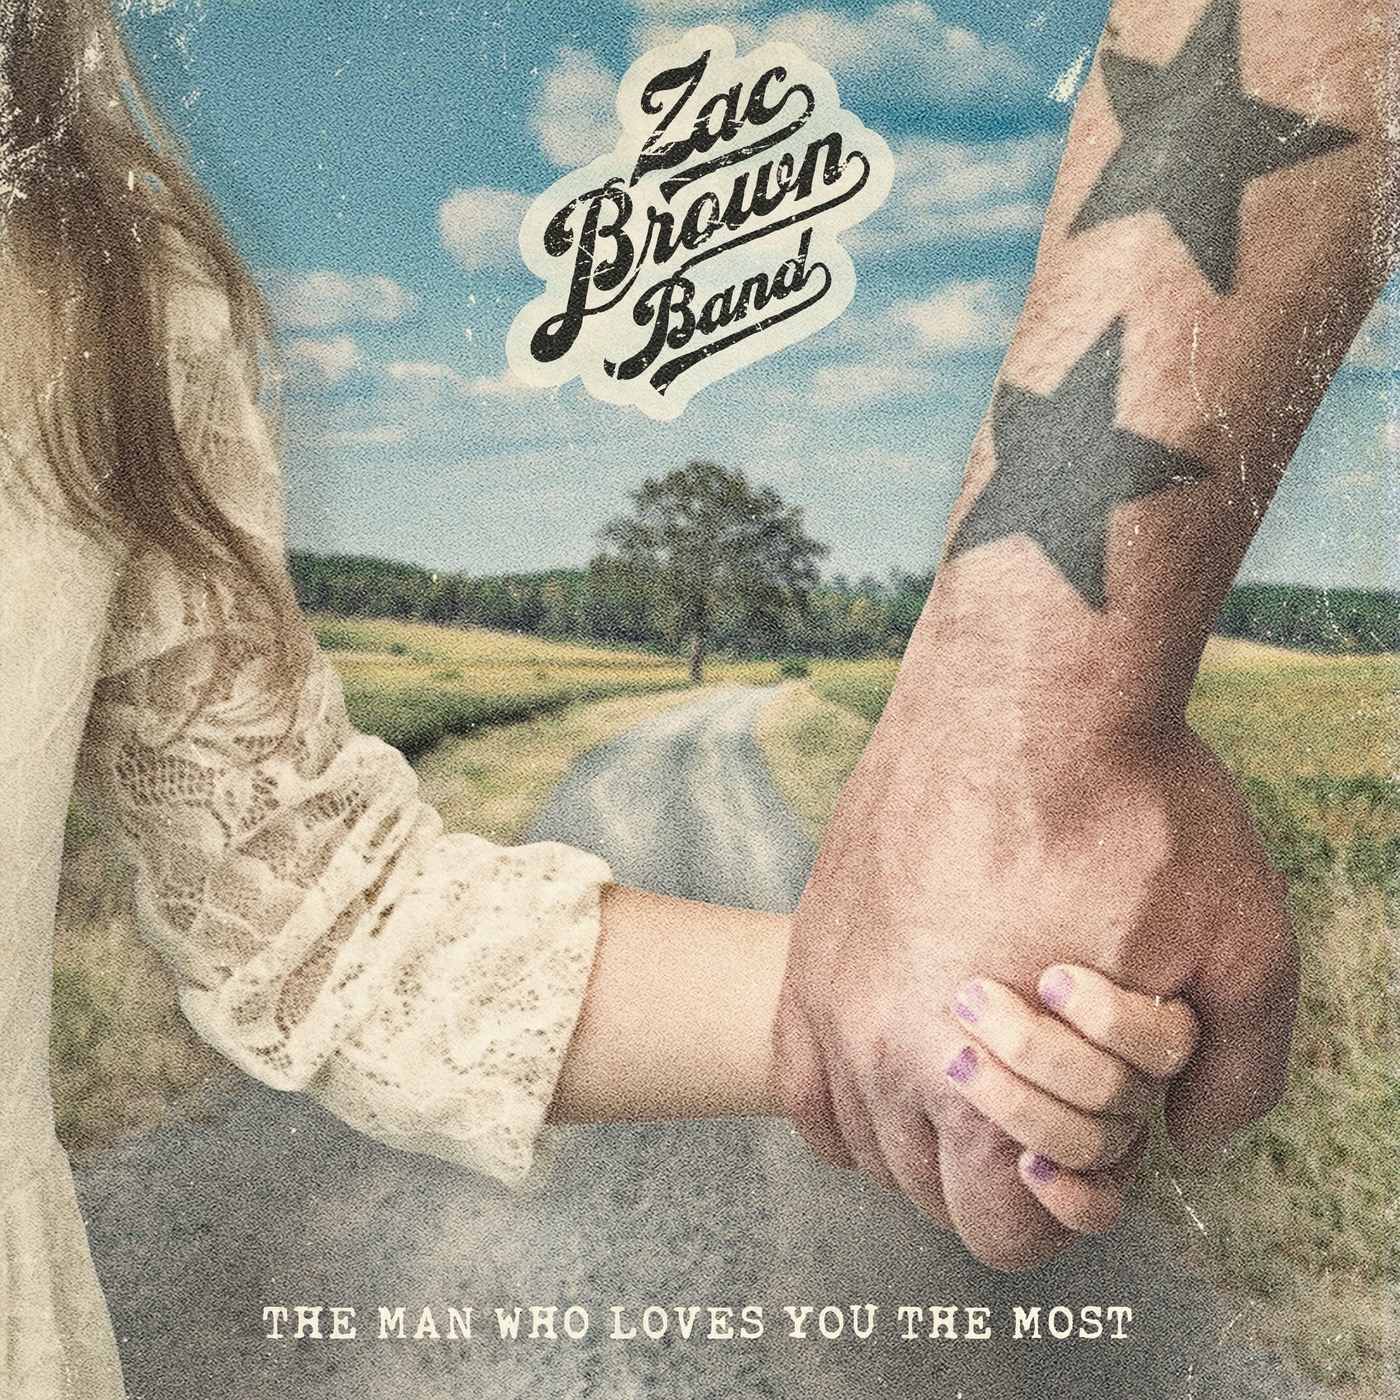 Zac Brown Band - The Man Who Loves You The Most